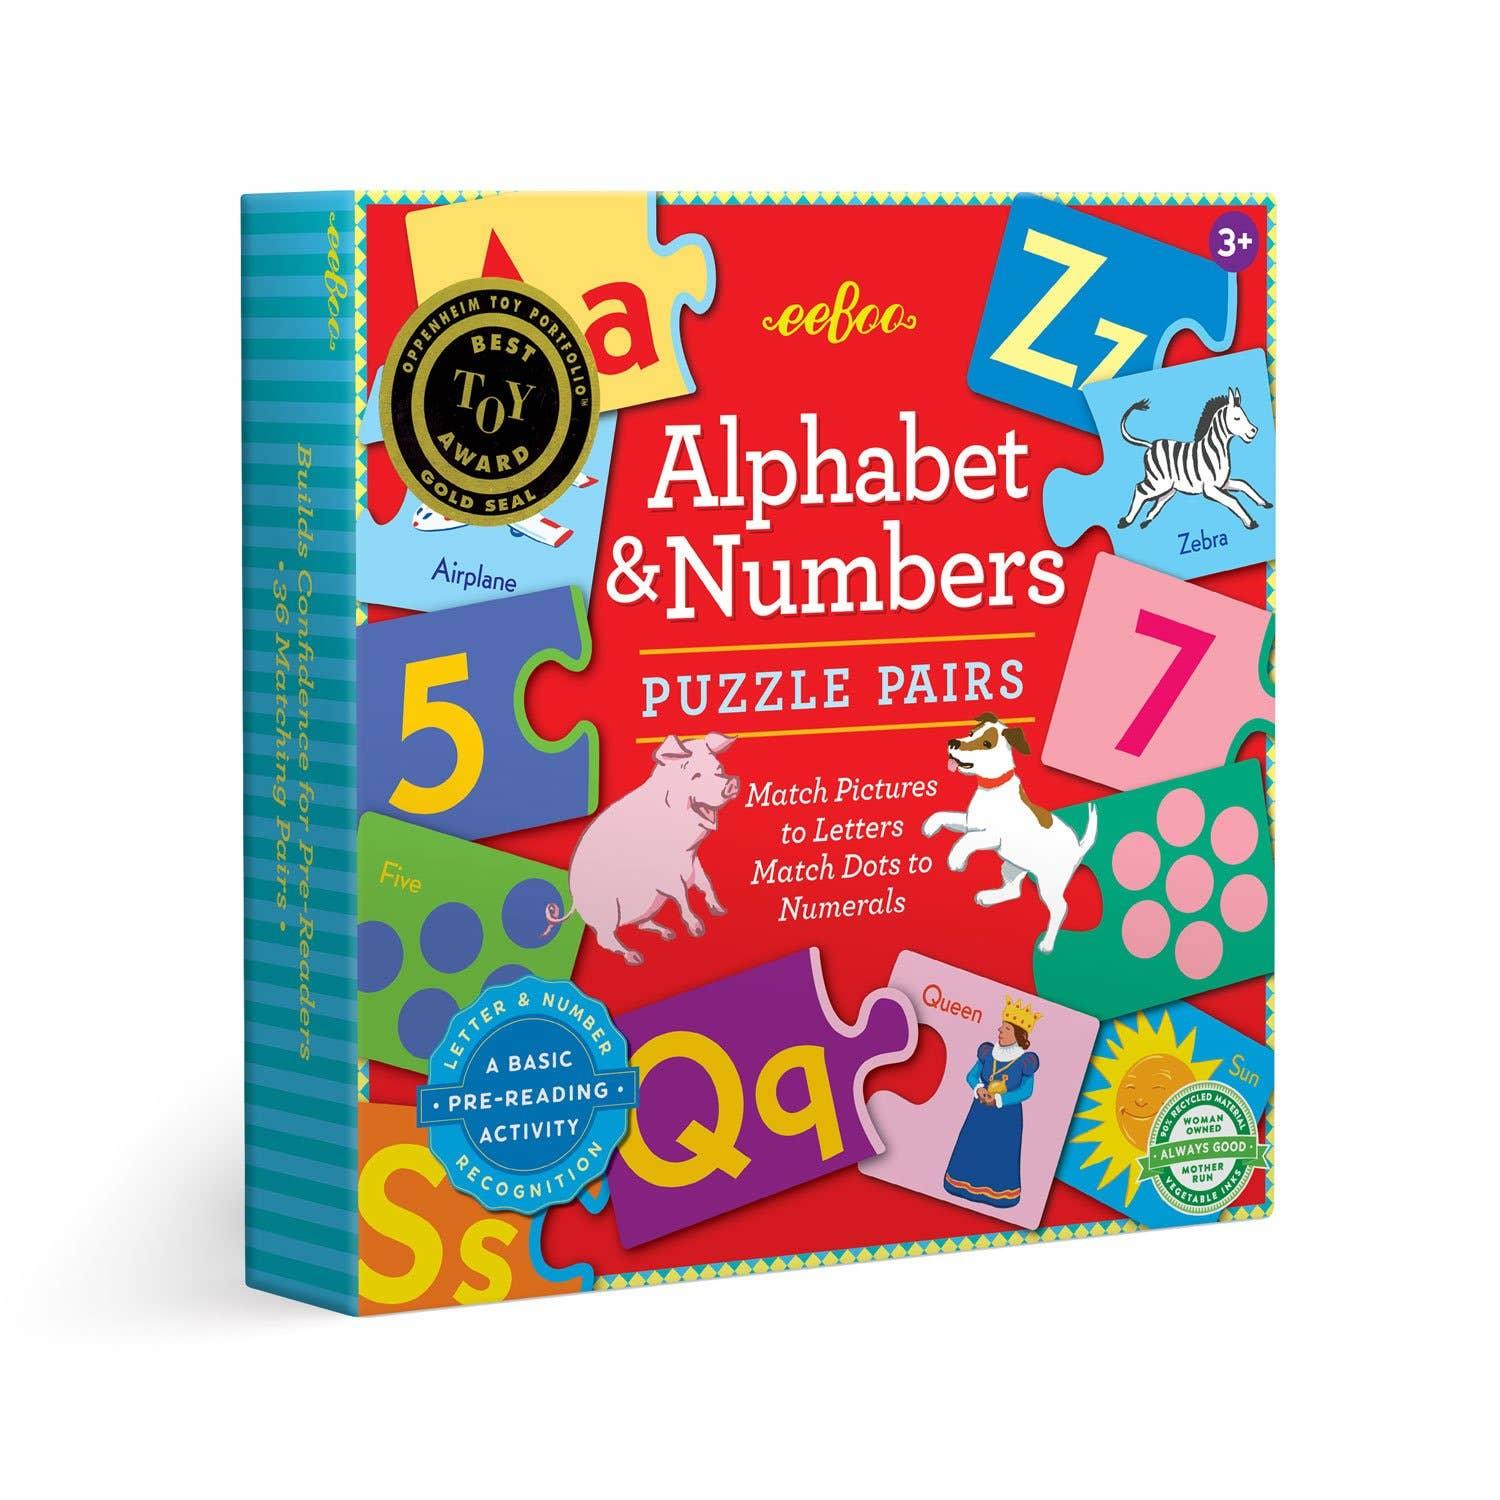 Alphabet & Numbers Puzzle Pairs - Why and Whale